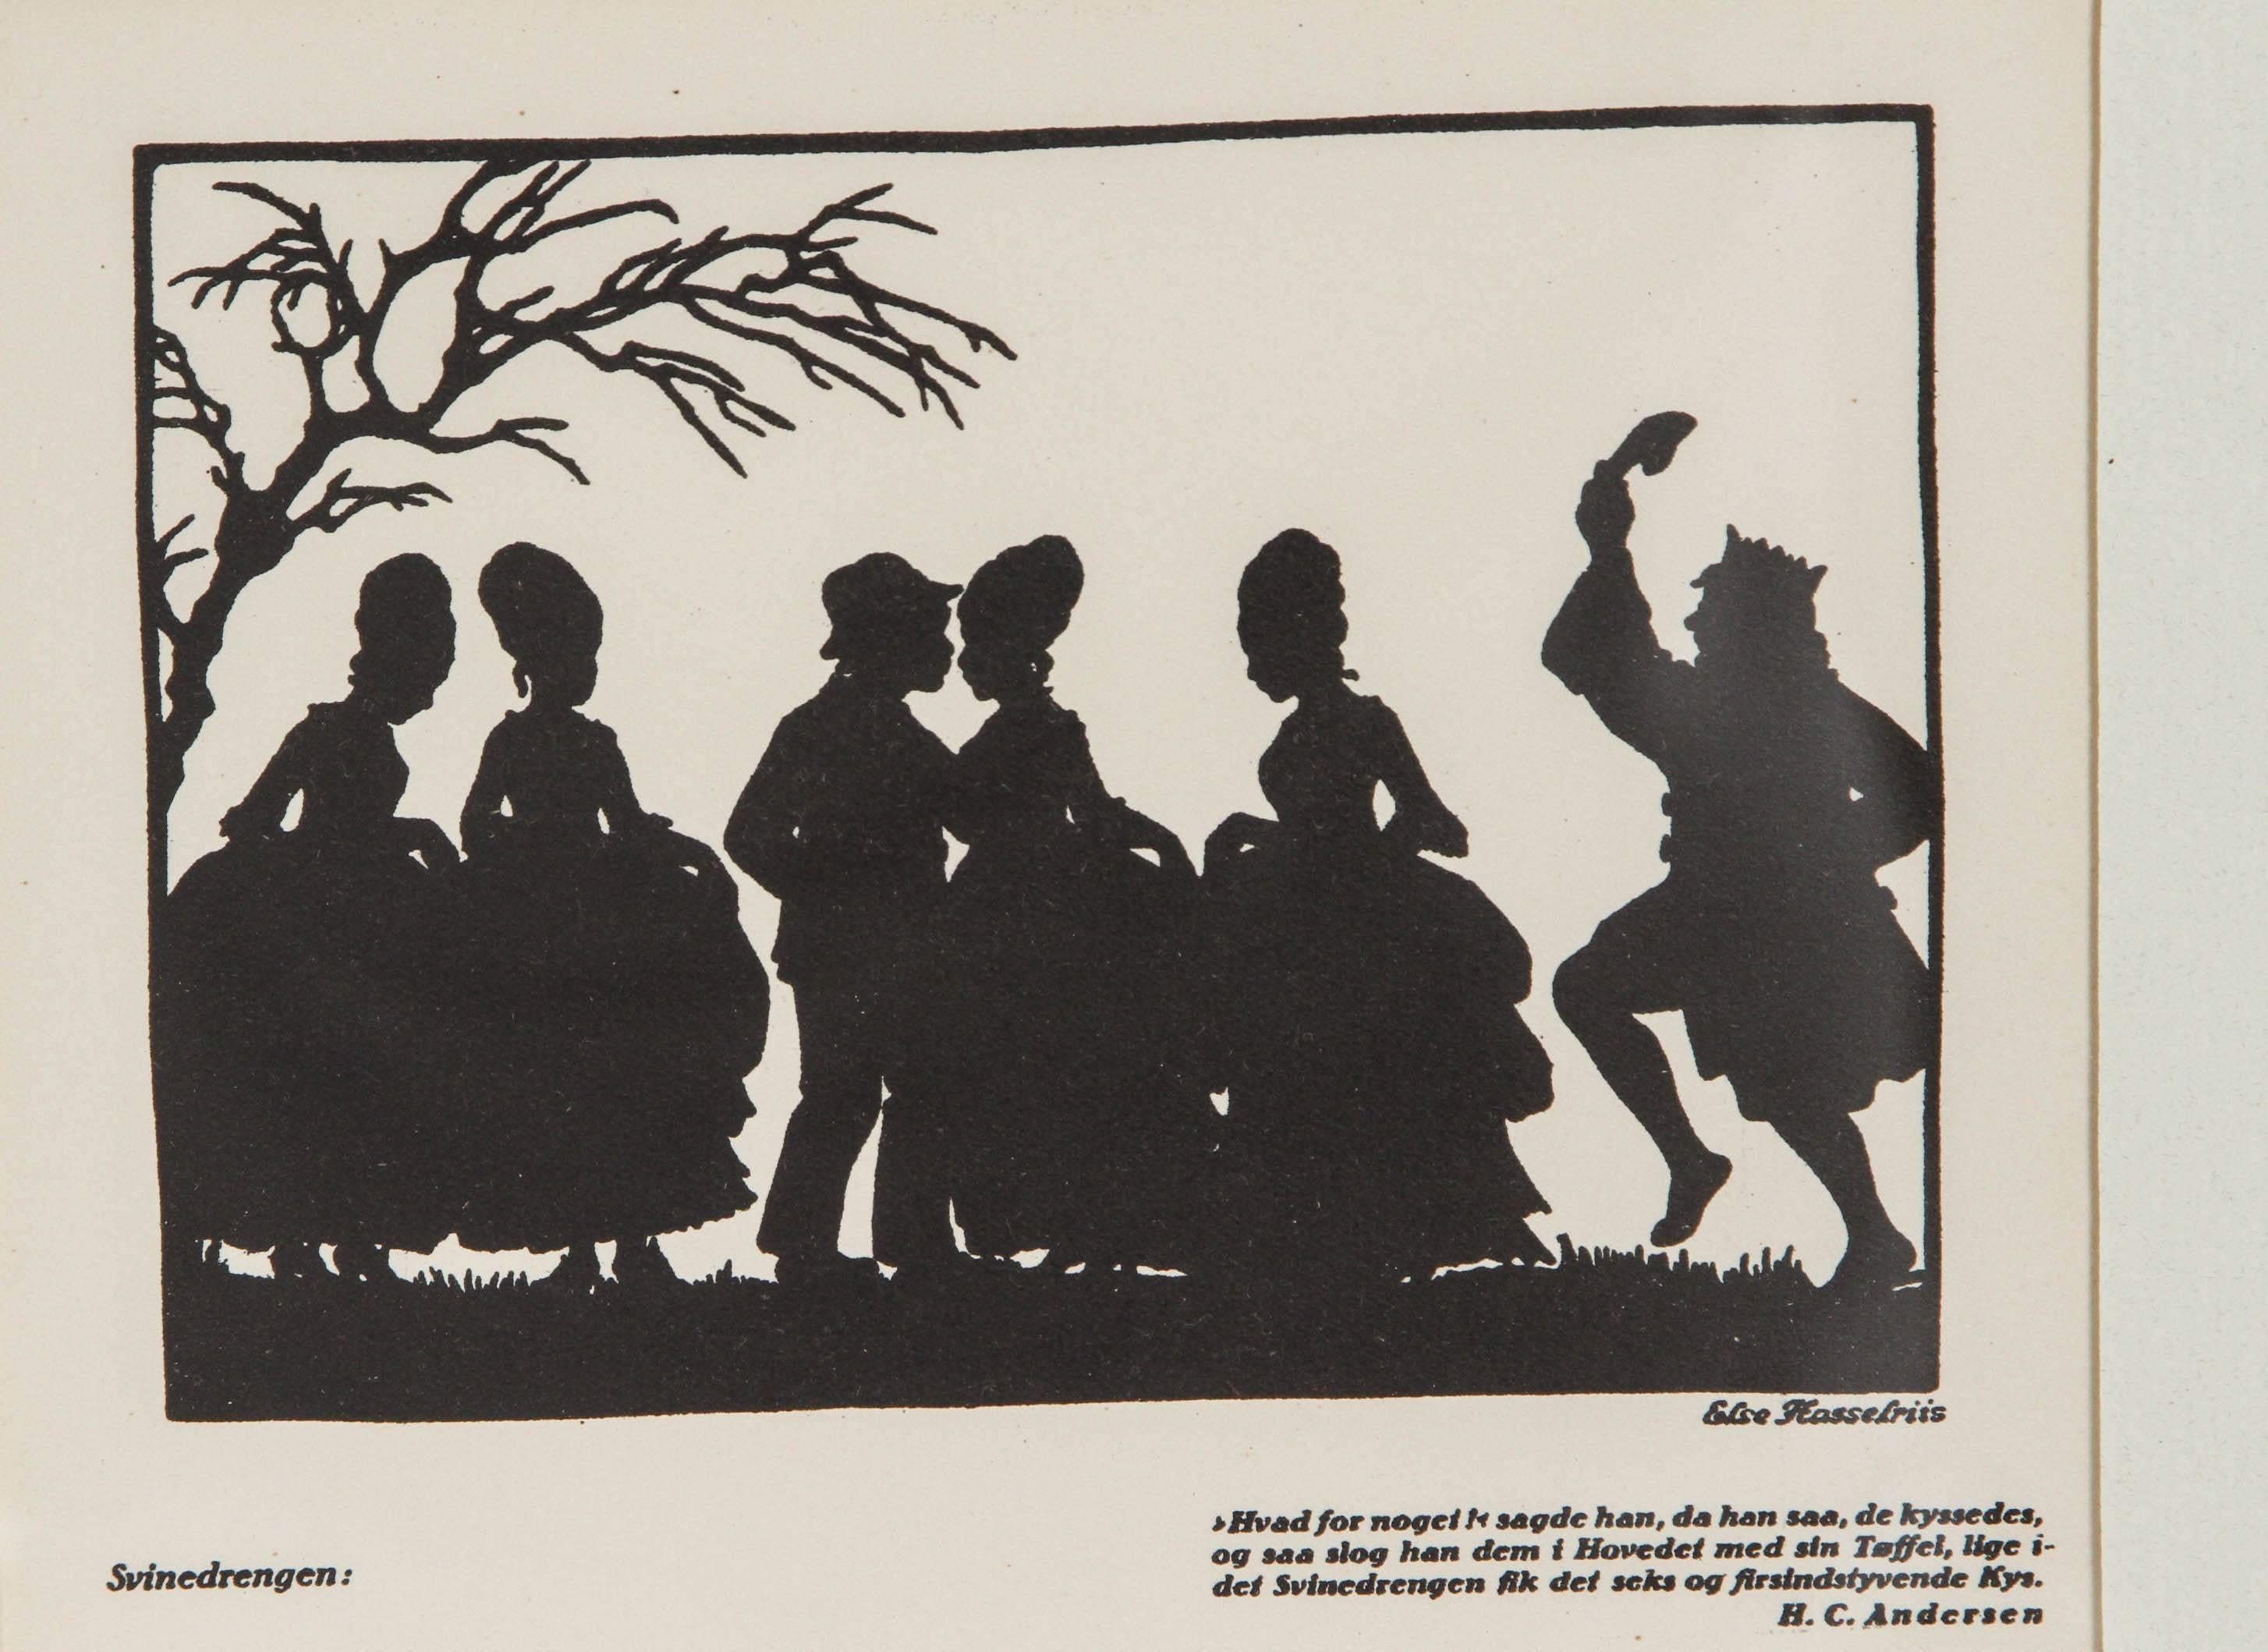 Newly matted and framed vintage silhouettes prints depicting images of Hans Christian Andersen fairy tales with Danish text, illustrated by Else Hasselriis.

Fairy tales depicted:
Swineherd.
The Naughty Boy.
Little Clause and Big Claus.
The